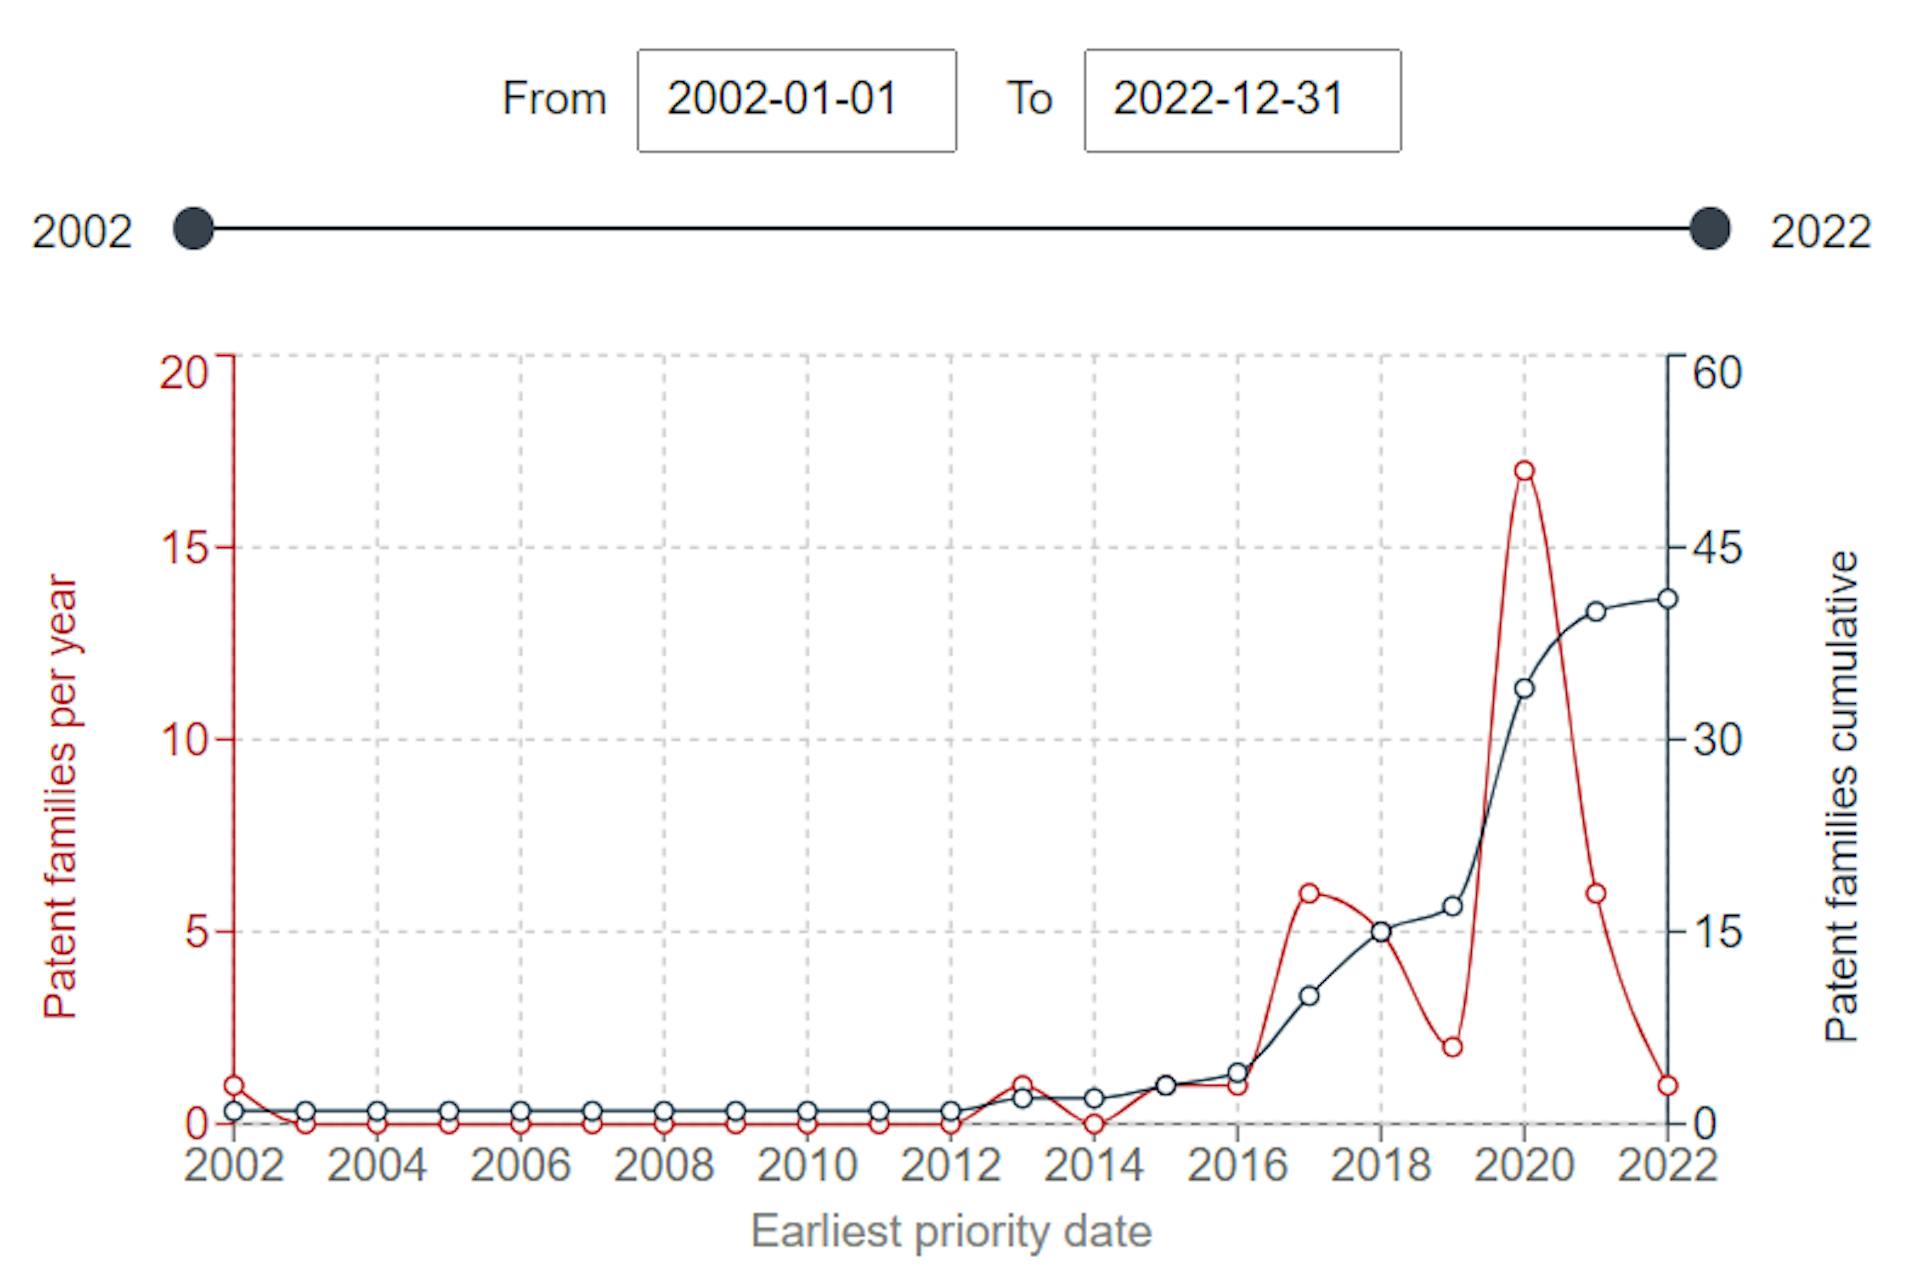 IBM: the red line shows the number of priority applications, the black line – the number of all patent publications  